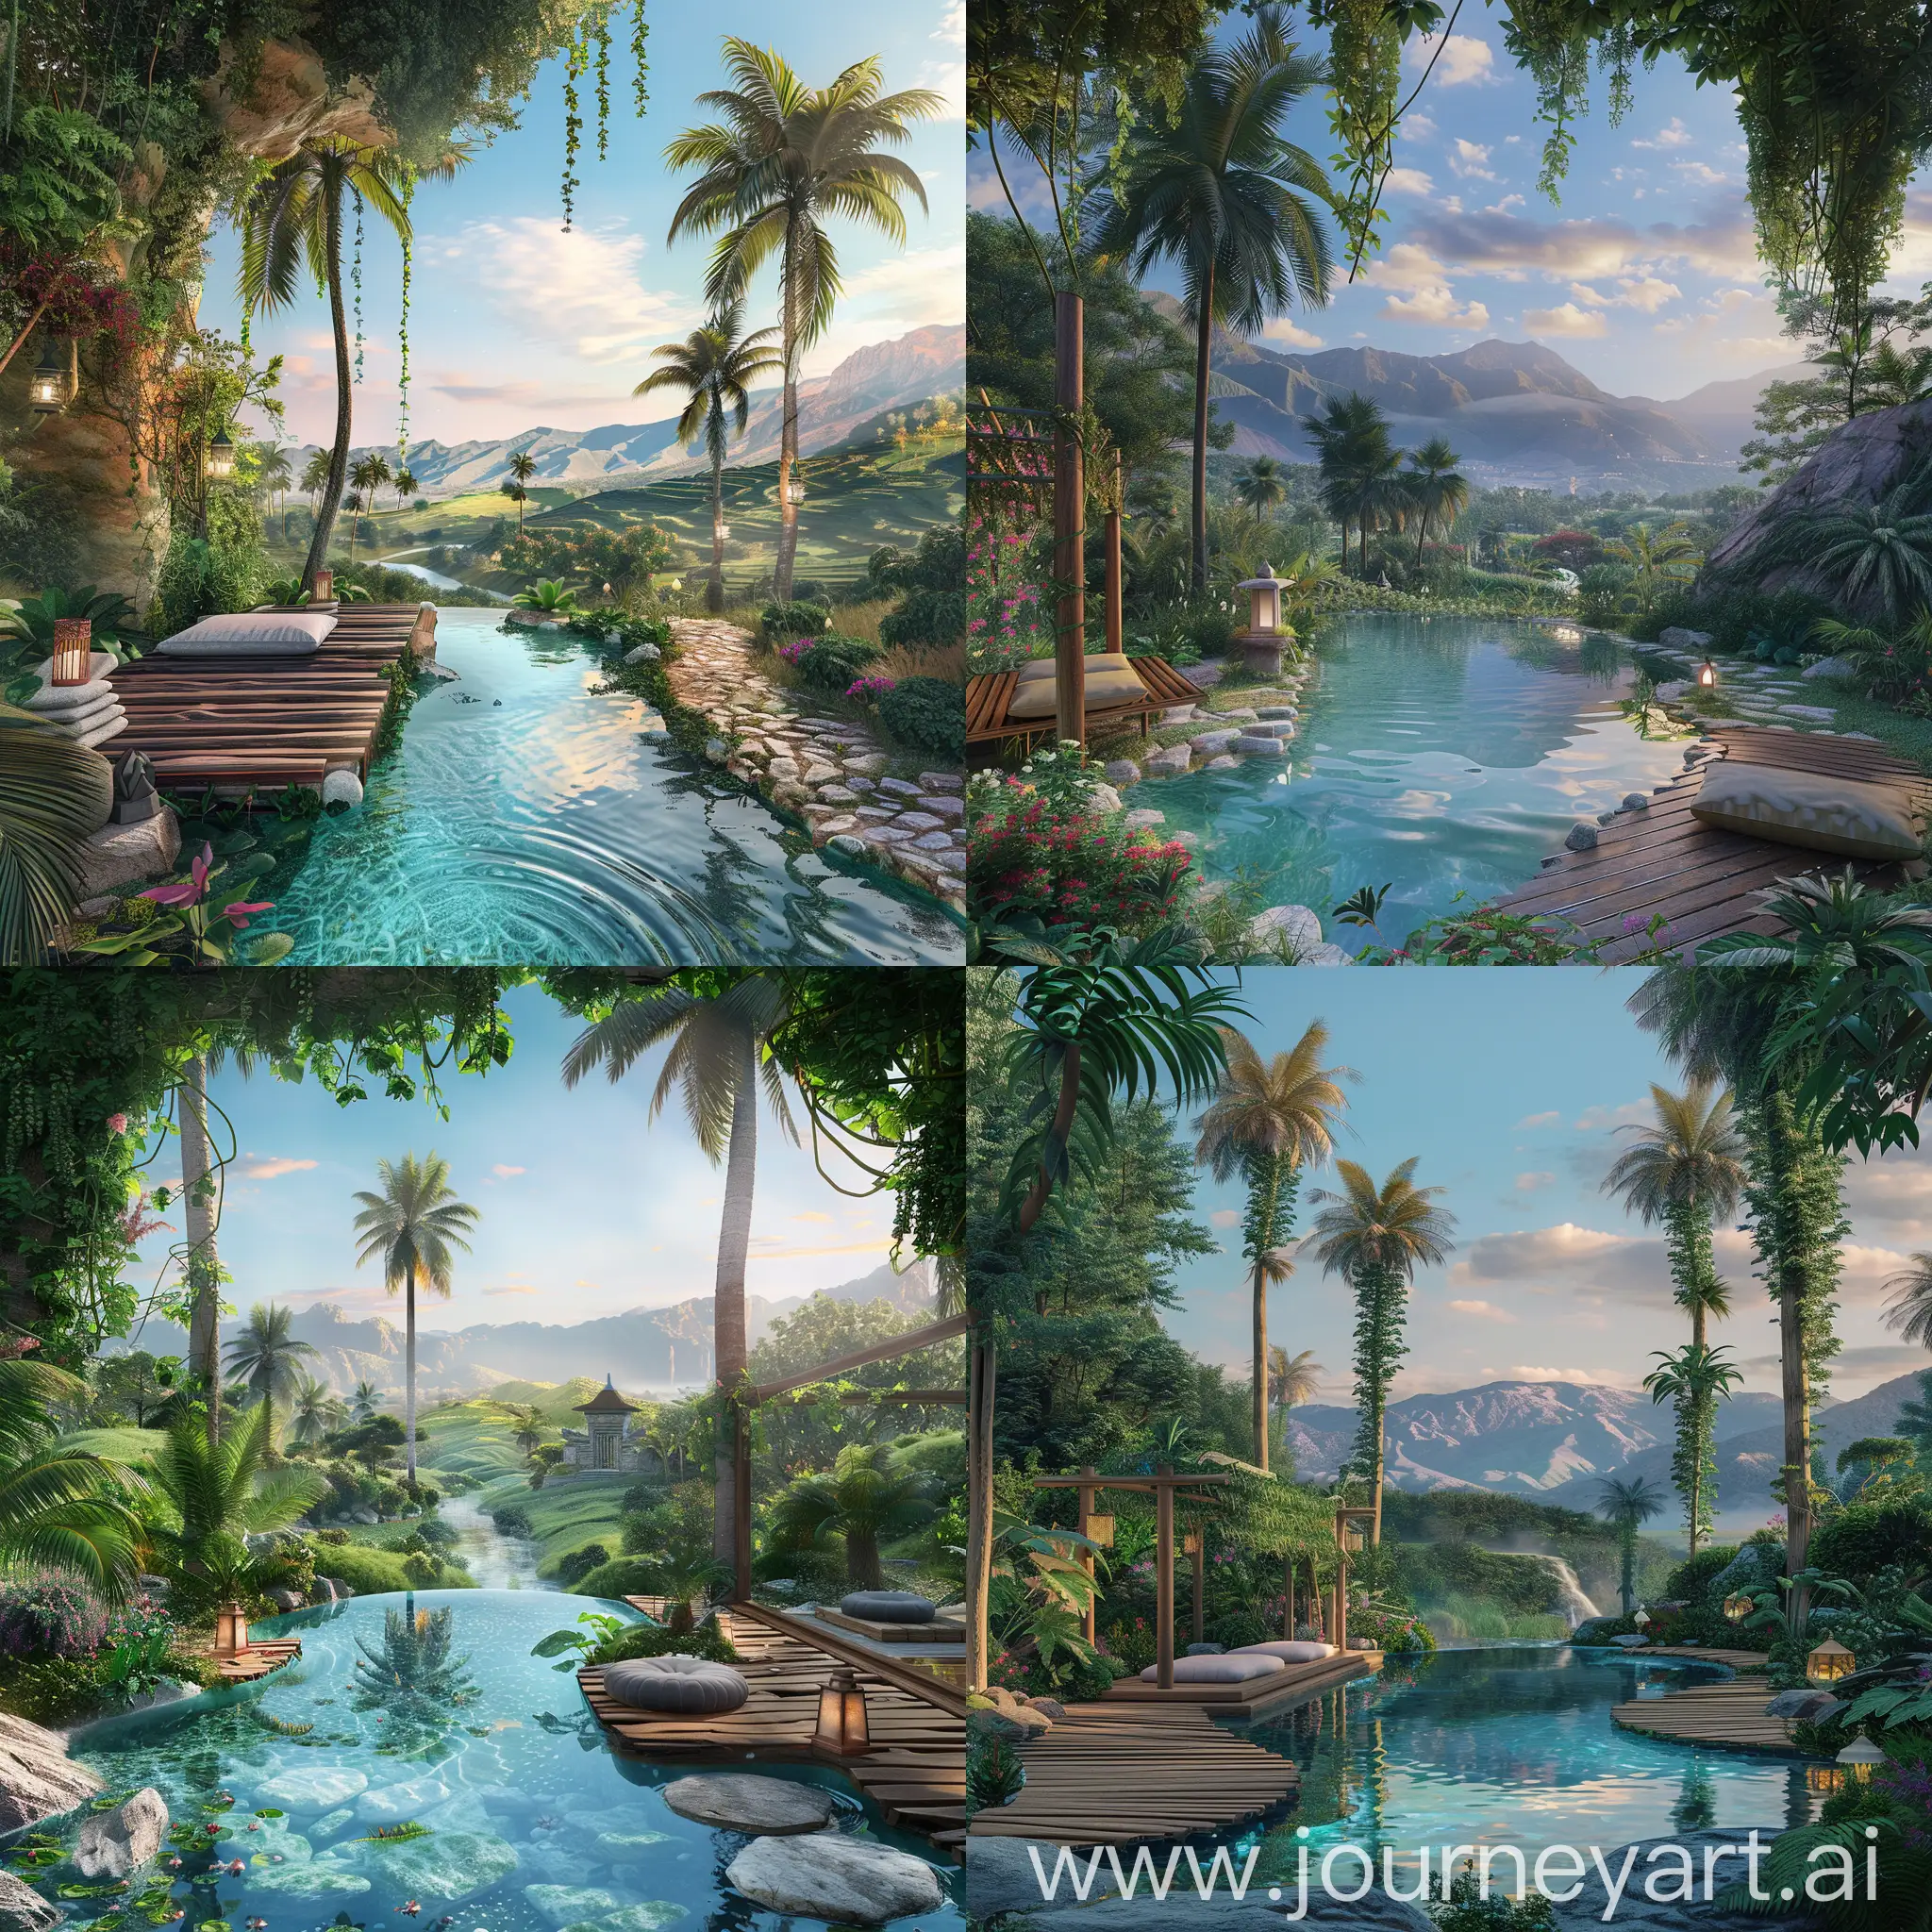 Generate an image depicting a serene oasis surrounded by lush greenery and nestled within rolling hills. The oasis should be a crystal-clear pool of water reflecting the blue sky above, with tall palm trees lining its edges. Include a wooden meditation platform with soft cushions on one side, shaded by a canopy of vines. Add a gentle stream nearby, meandering through the landscape. On the other side of the oasis, depict a pathway leading to a secluded meditation garden adorned with colorful flowers and aromatic herbs, with stone lanterns lighting the way. In the distance, show majestic mountains rising against the horizon, bathed in the warm glow of the setting sun. Capture the overall feeling of tranquility and invite the viewer to escape into this serene oasis for a mindful retreat.